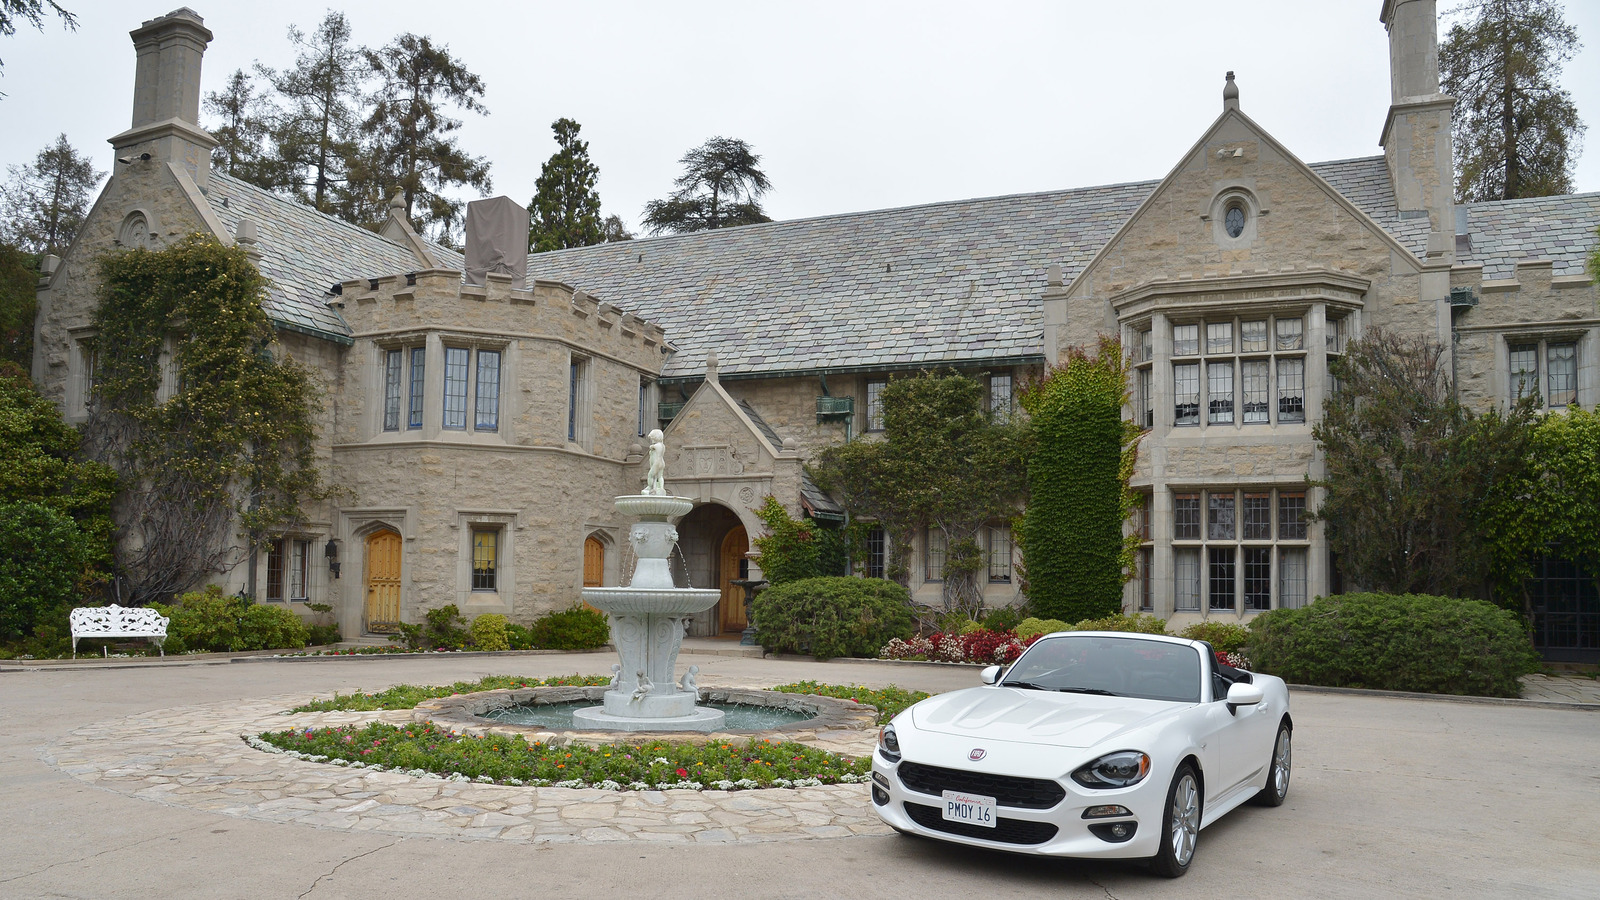 Facts About The Playboy Mansion The Public Doesnt Know